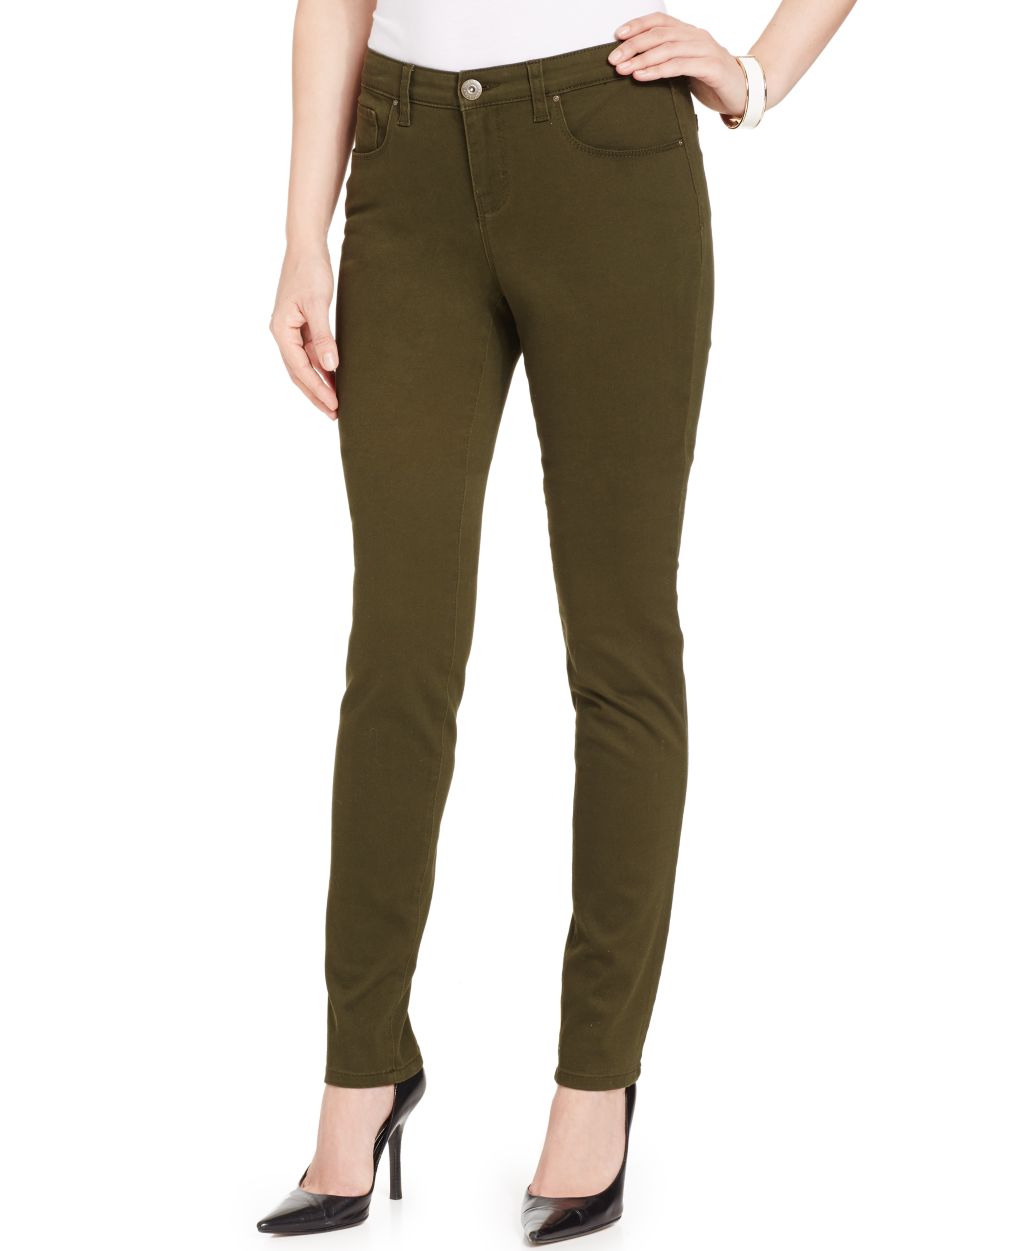 Style & Co. Cotton/spandex Curvy-Fit Colored Wash Skinny Jeans, Only at Macy's